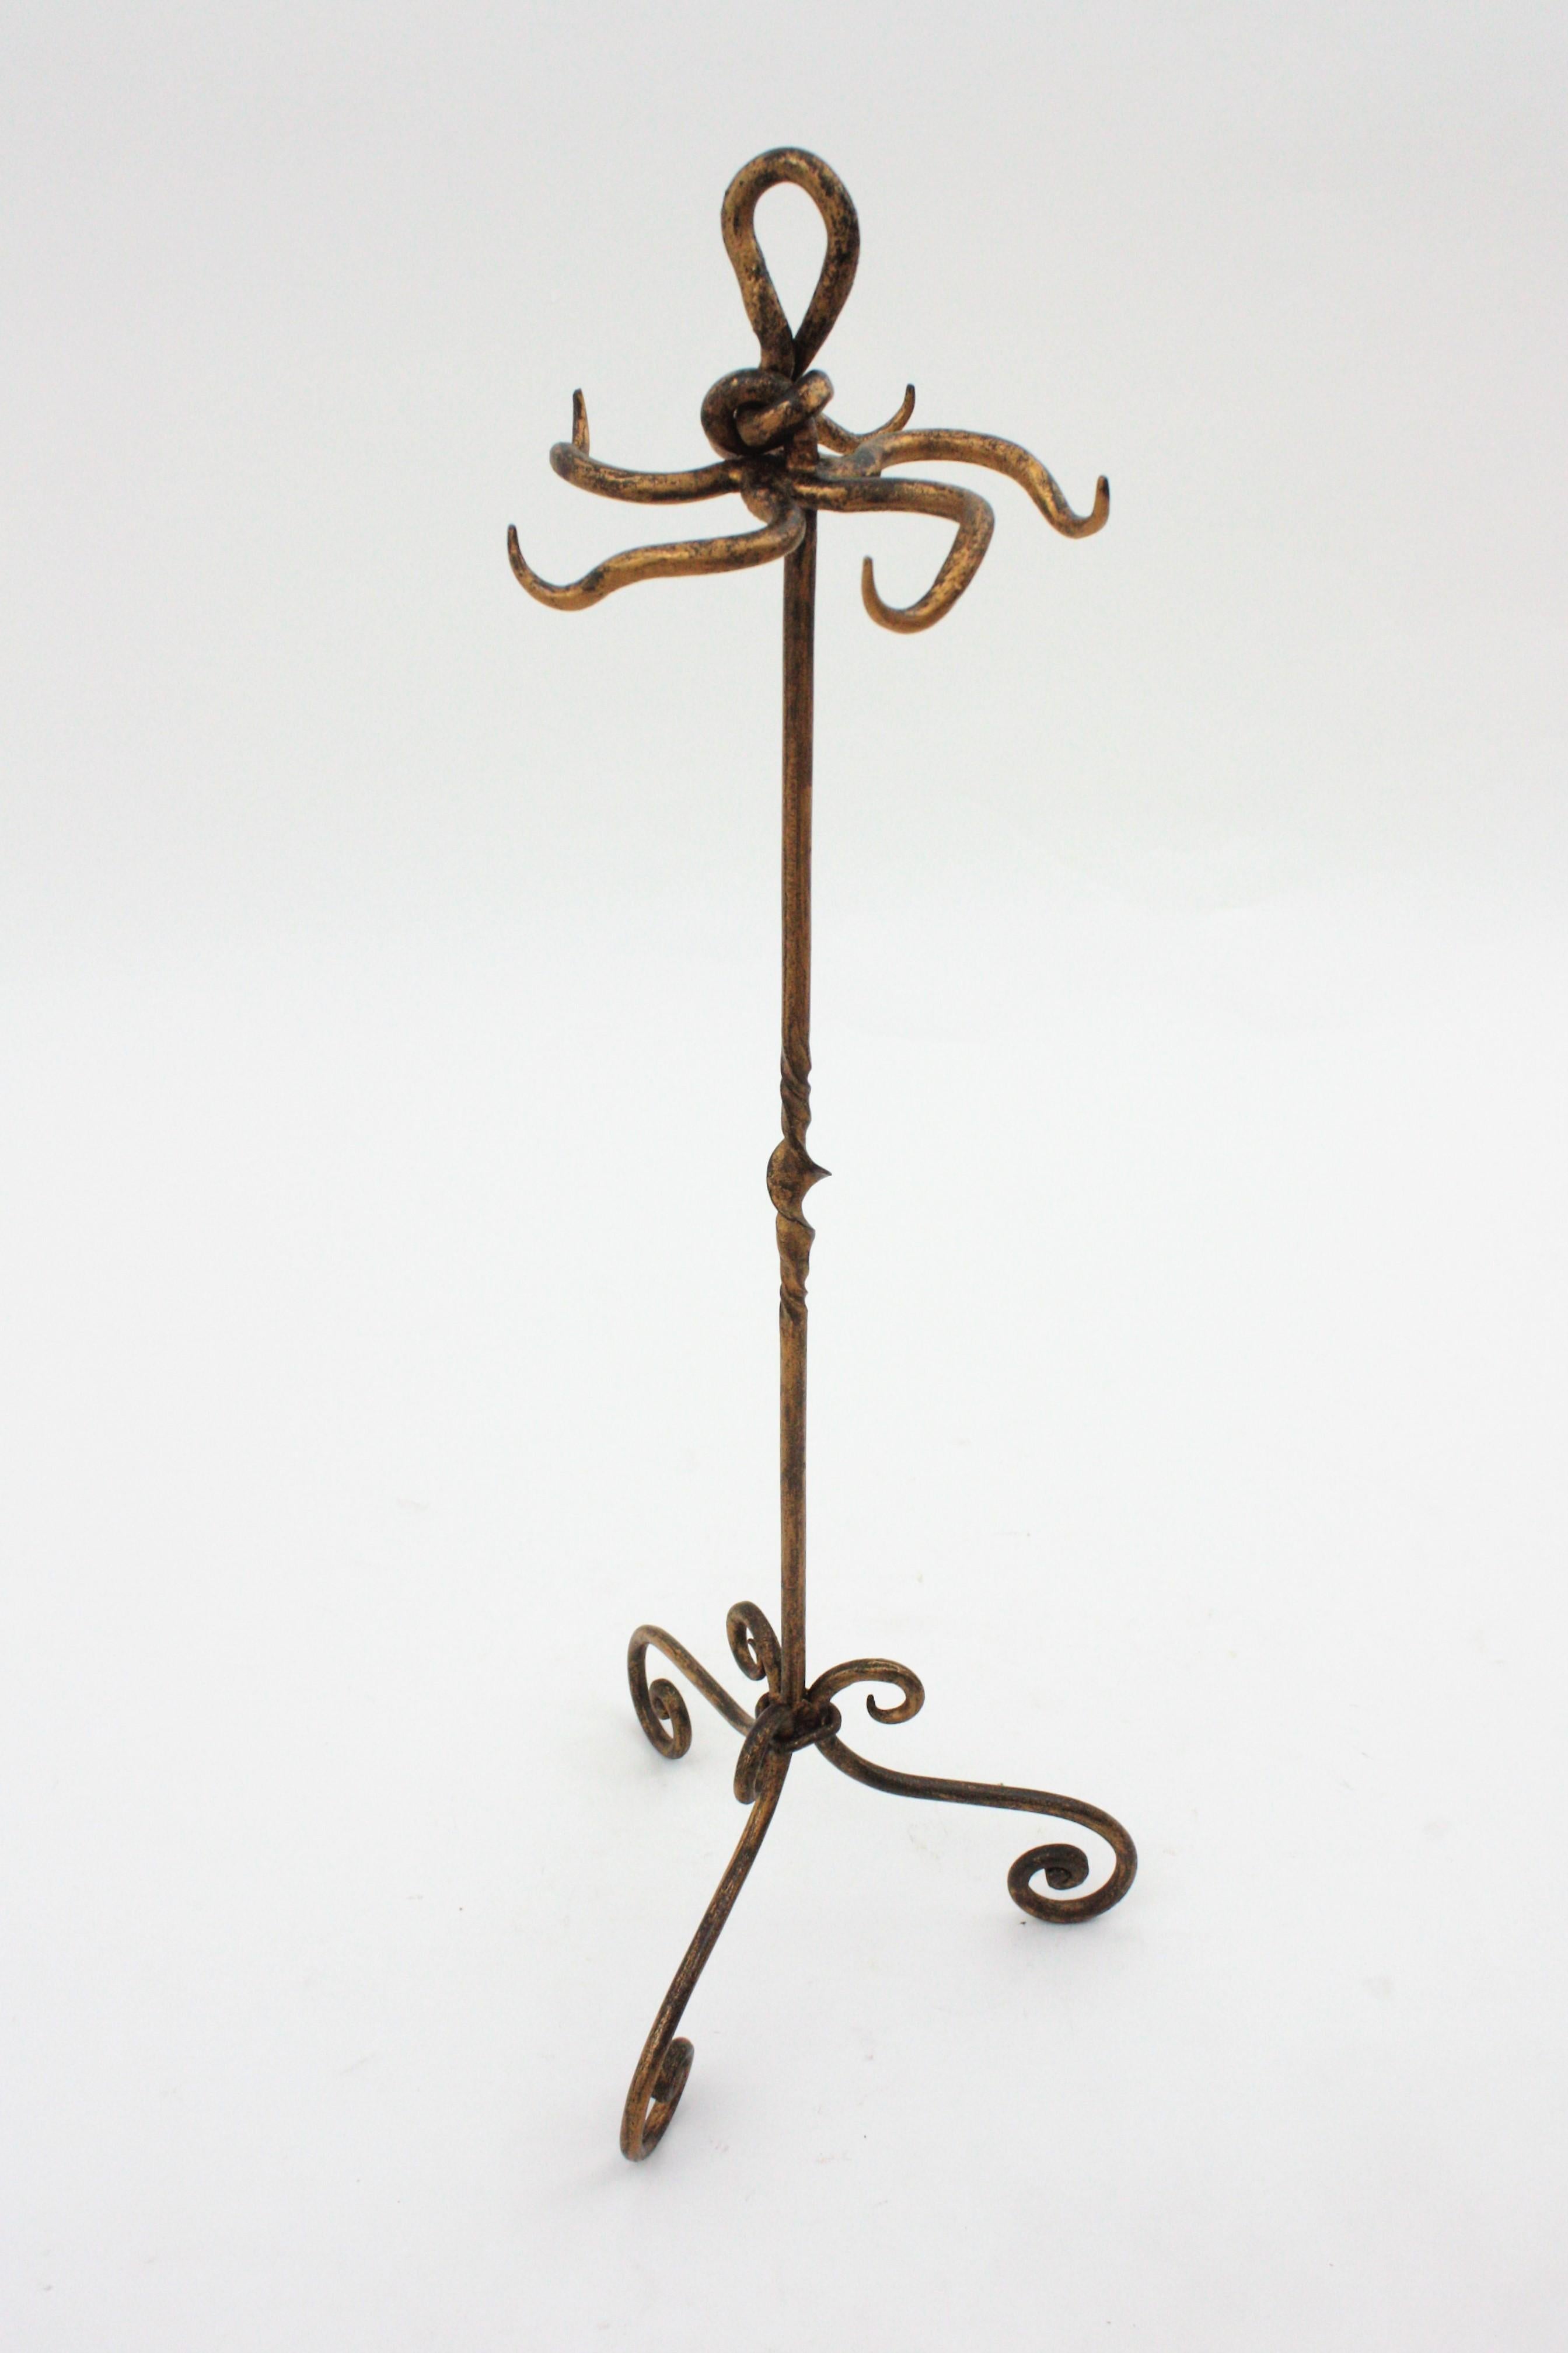 Spanish Brutalist Fireplace Tool Set Stand, Gilt Wrought Iron and Knot Design In Good Condition For Sale In Barcelona, ES